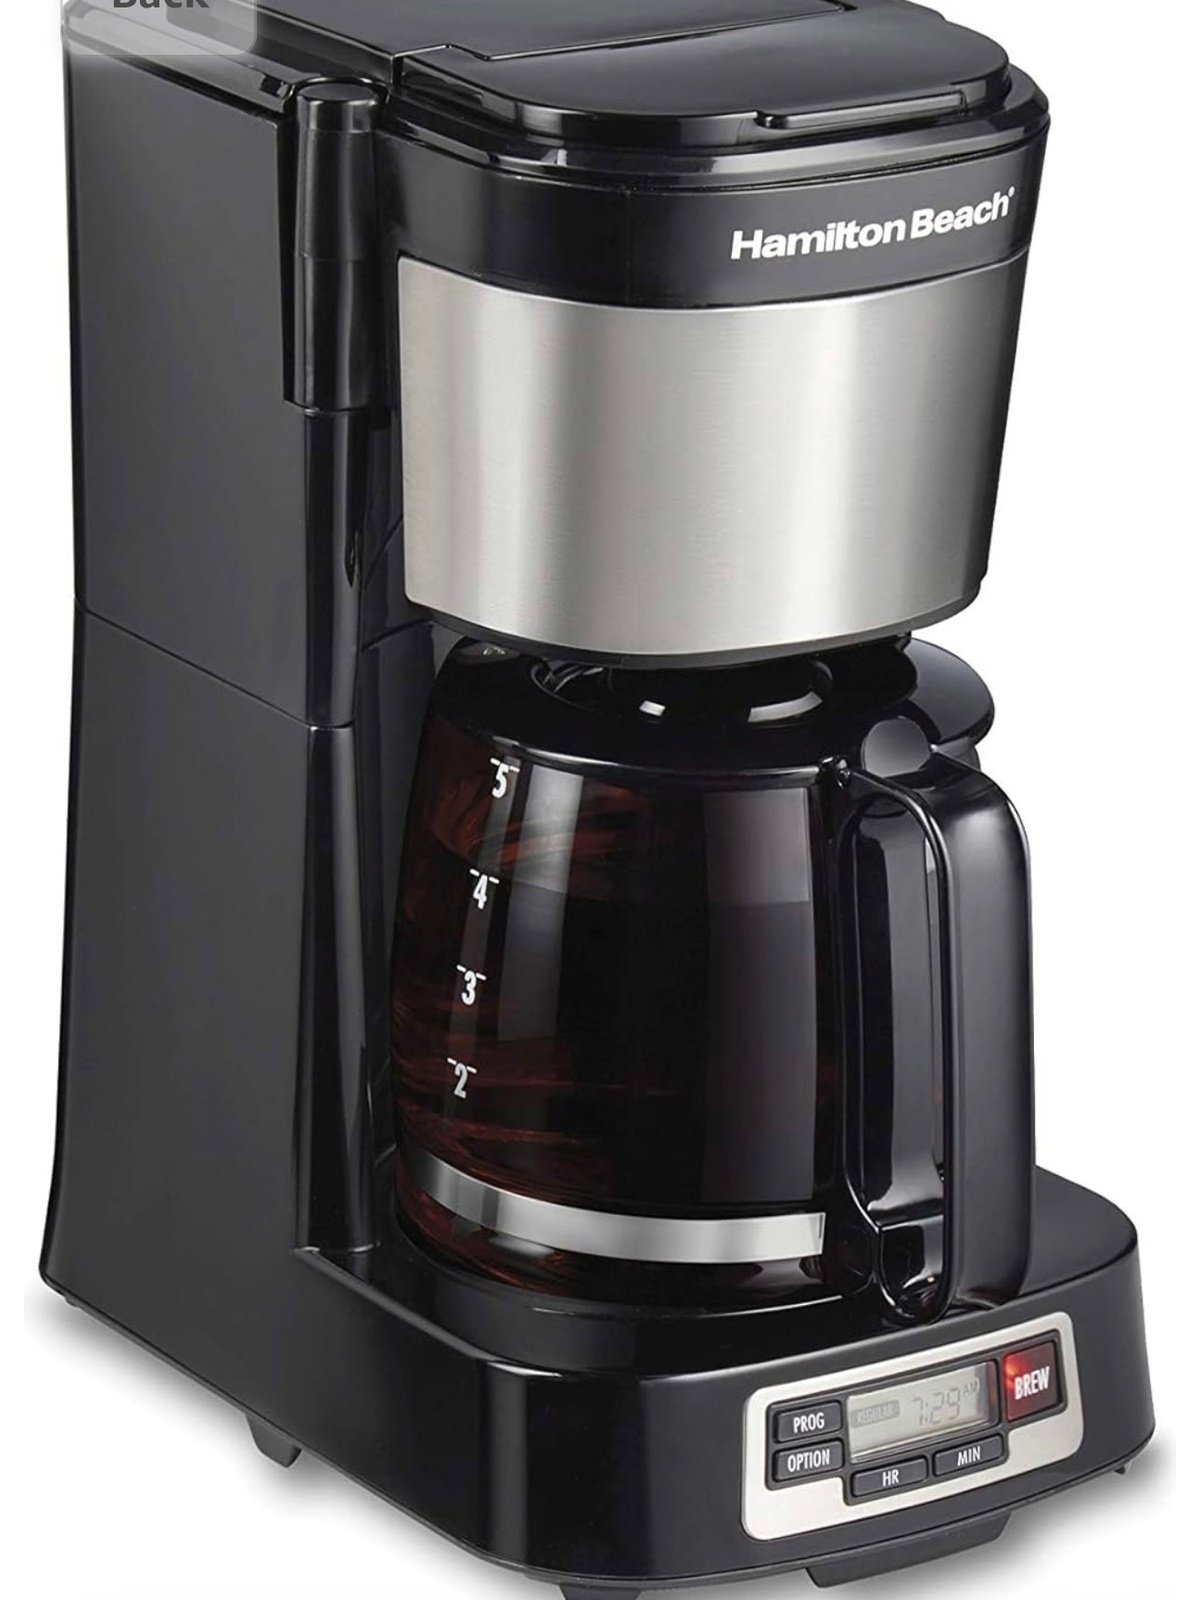 Hamilton Beach 5 Cup Compact Drip Coffee Maker with Programmable Clock, Glass Carafe, Auto Pause and Pour, Black & Stainless Steel 46111